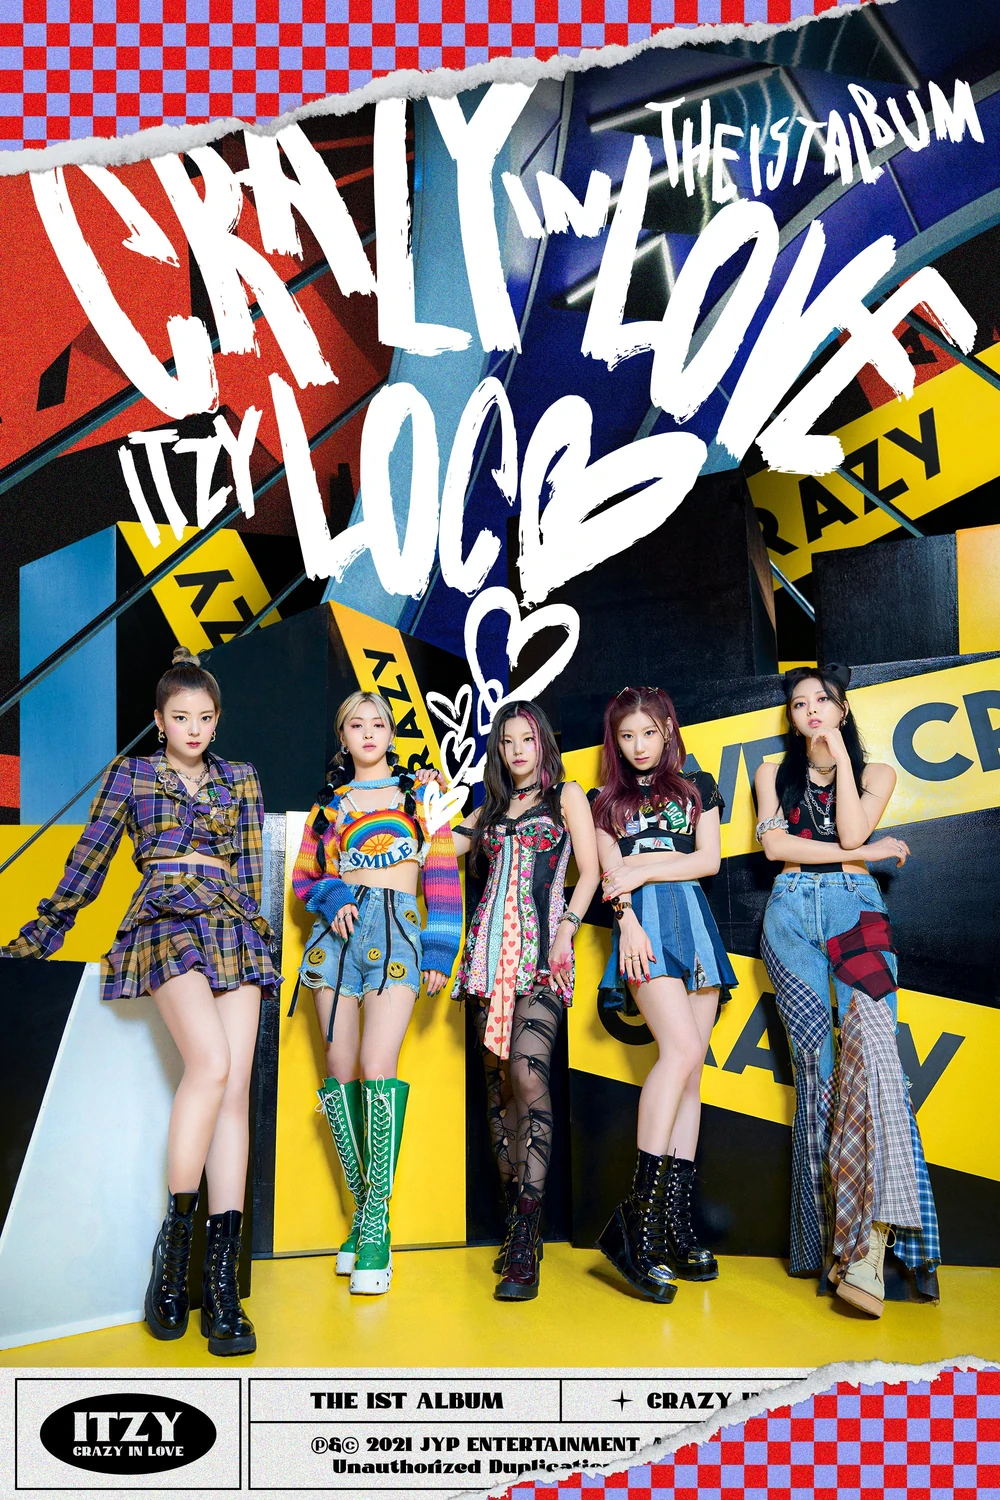 Itzy Crazy In Love Group Concept Teaser Picture Image Photo Kpop K-Concept 1